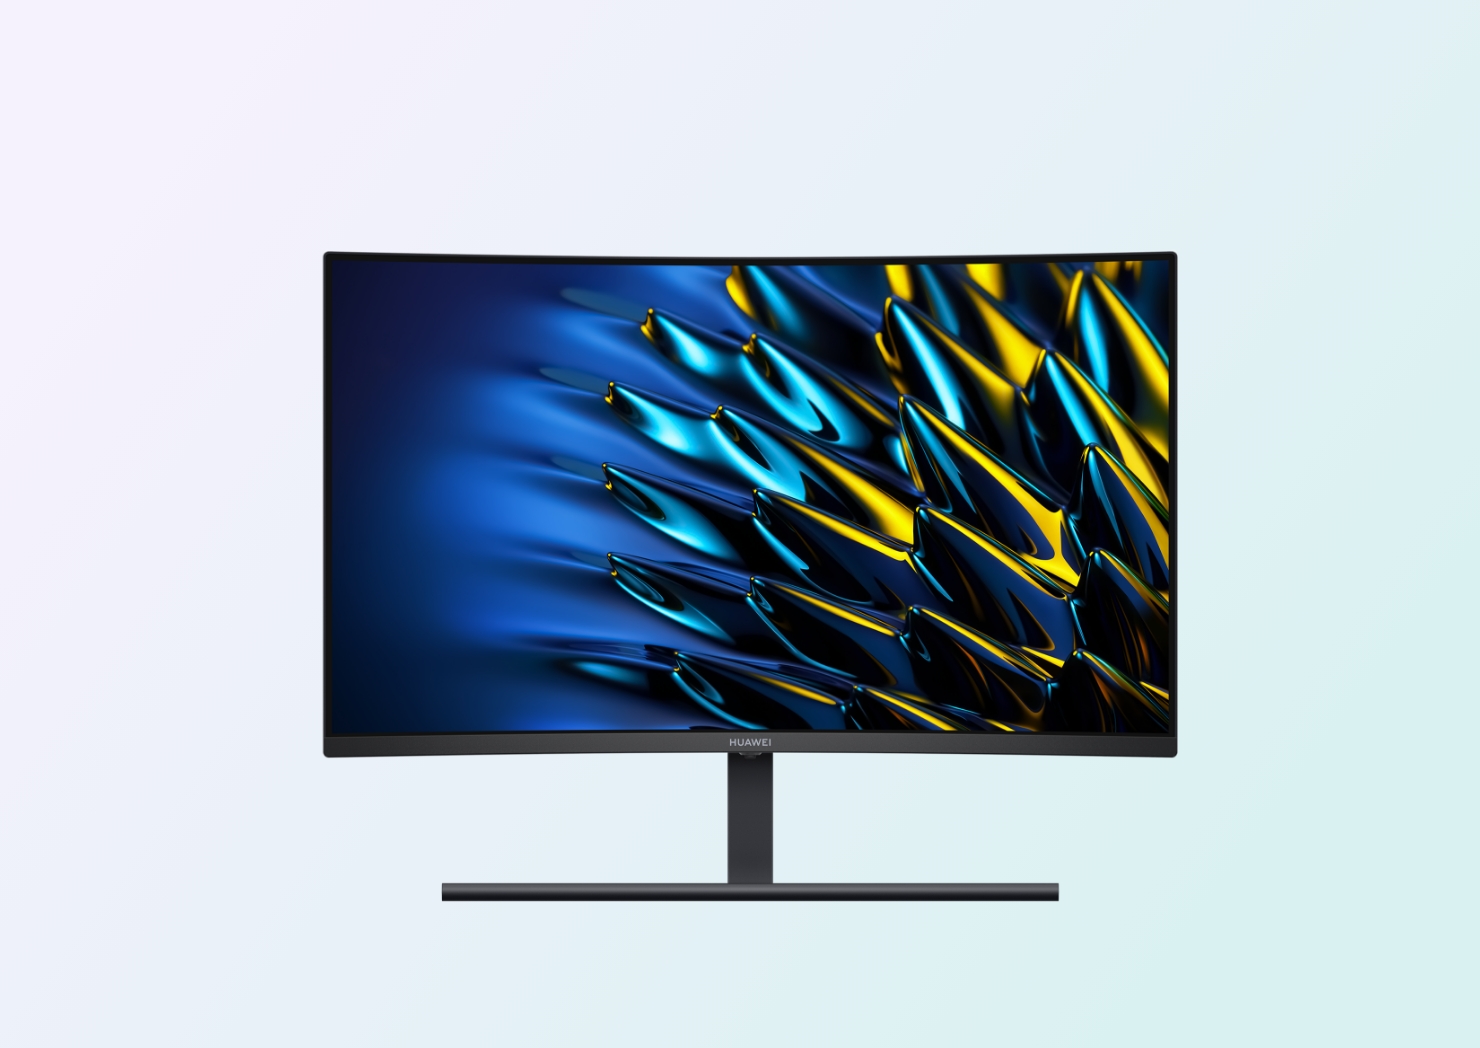 MateView GT 27-inch Standard Edition SE